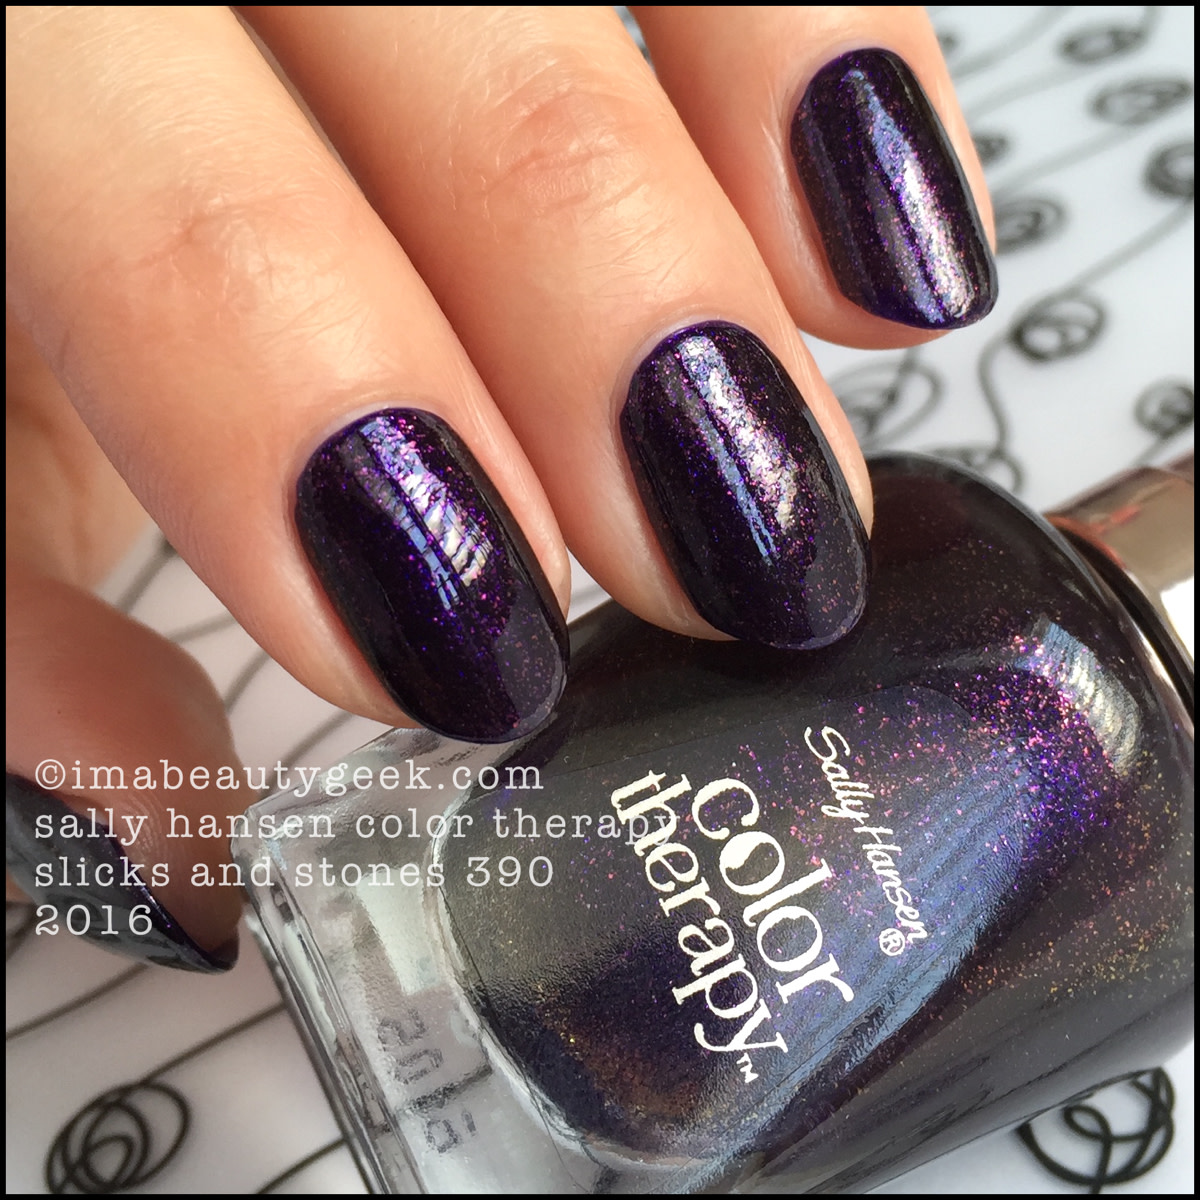 Sally Hansen Color Therapy Slicks and Stones 390_Sally Hansen Color Therapy Review Swatches